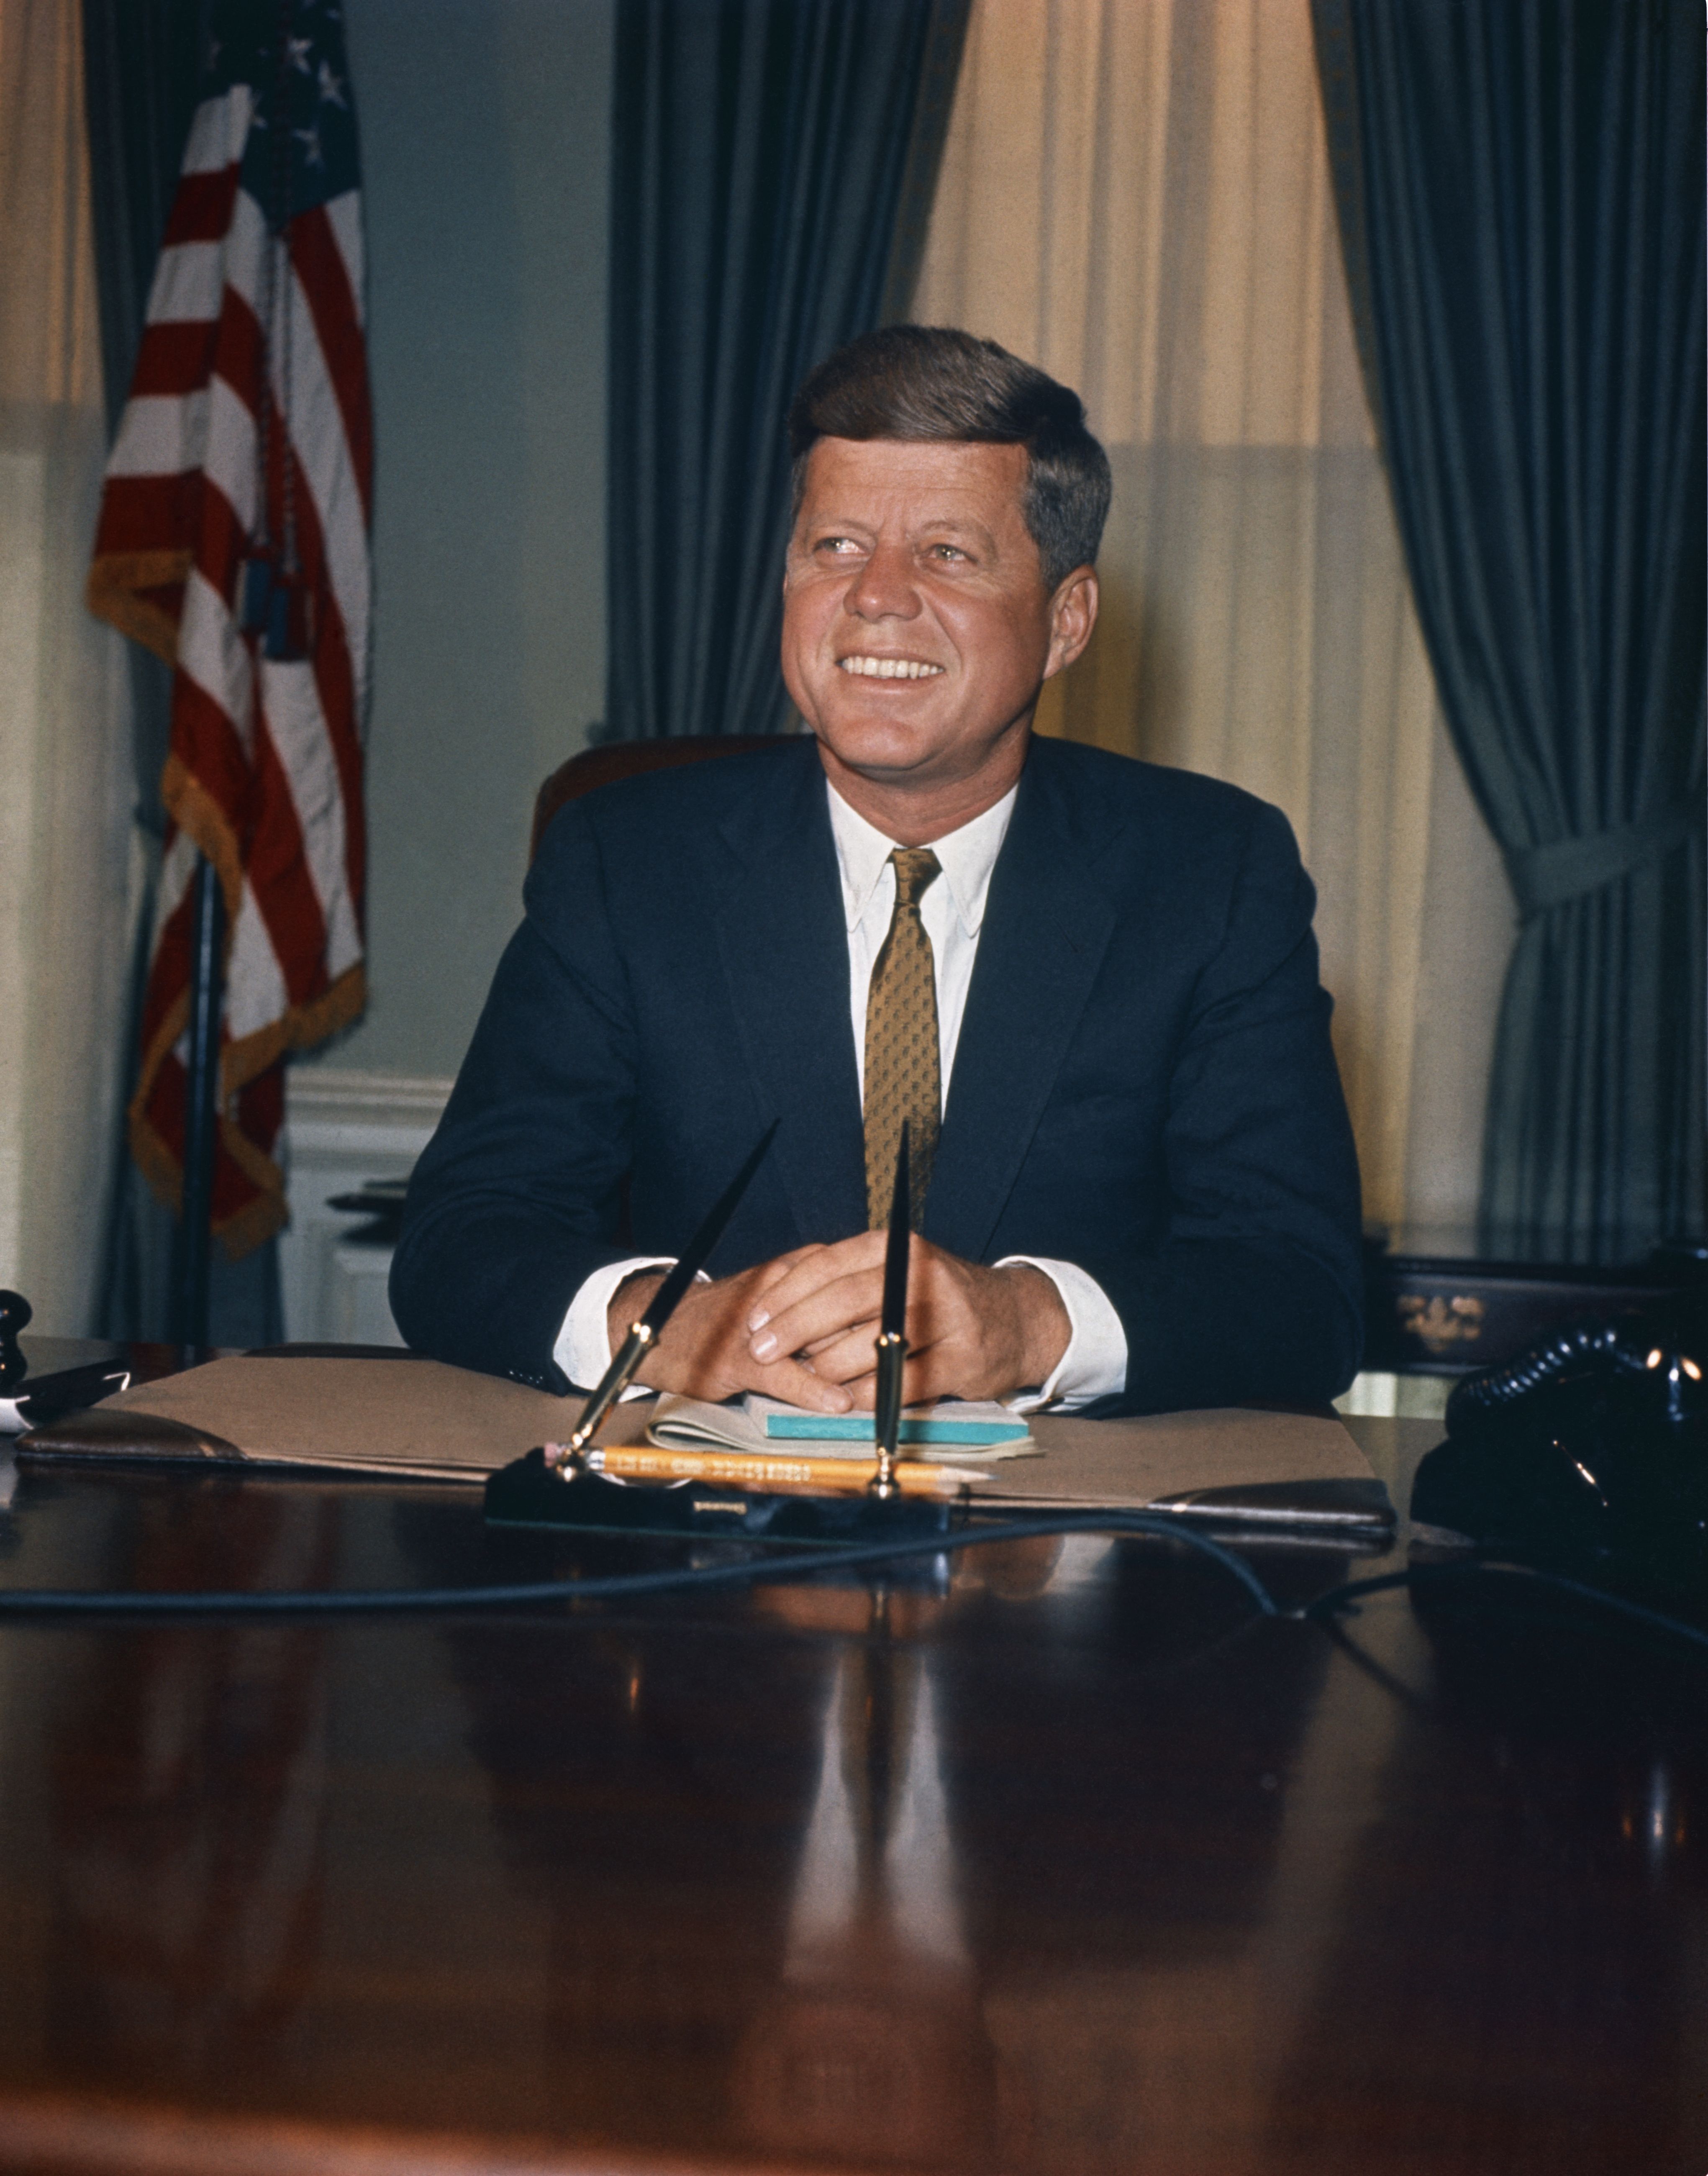 President JFK in White House, early 1960s| Photo: Getty Images 